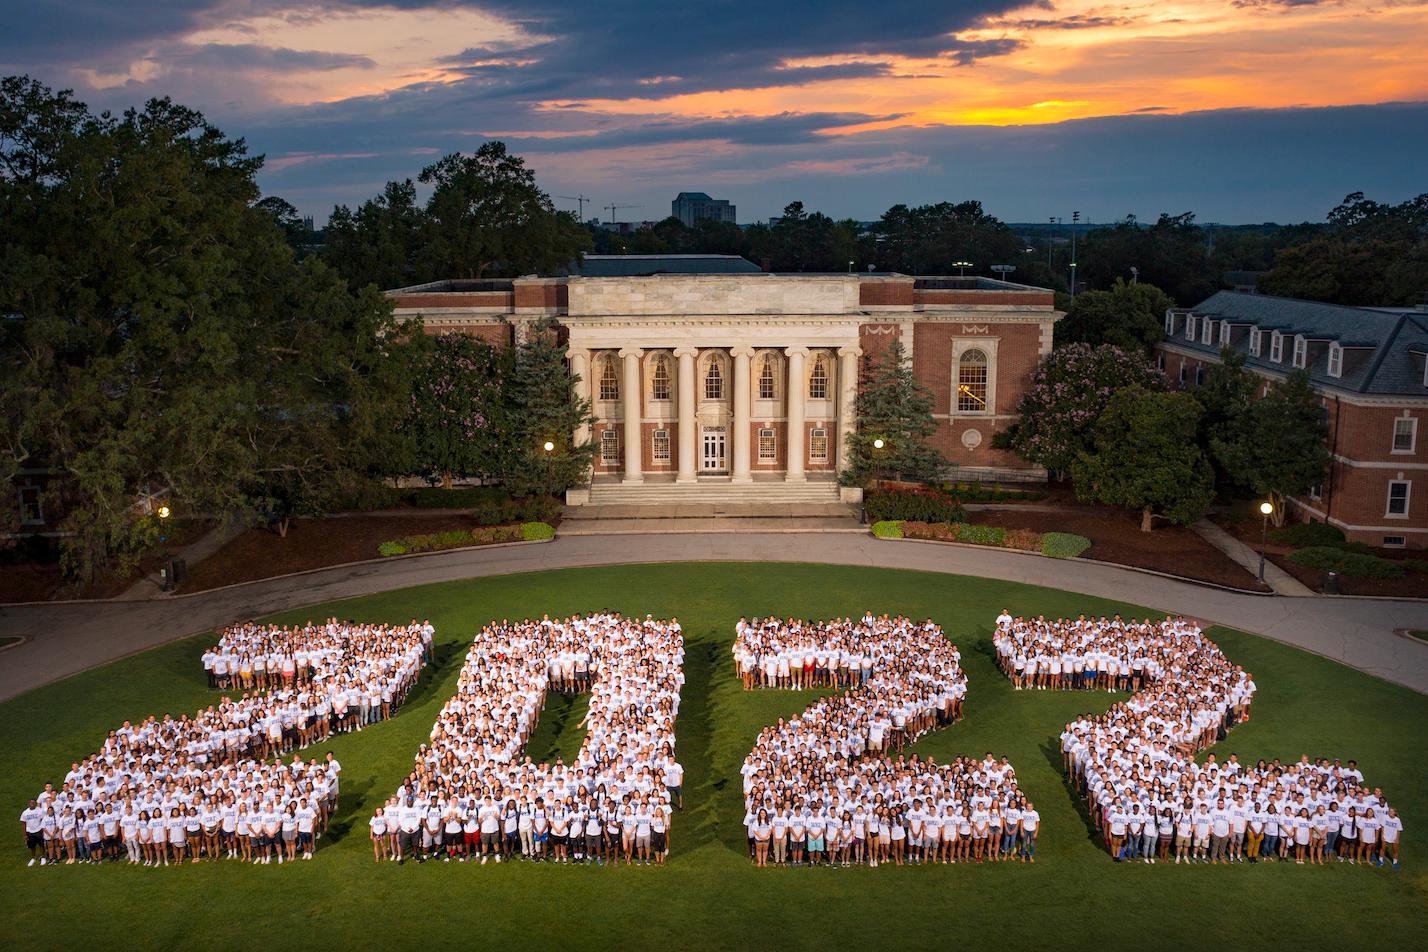 first year students standing in class year 2022 formation on East Campus Quad